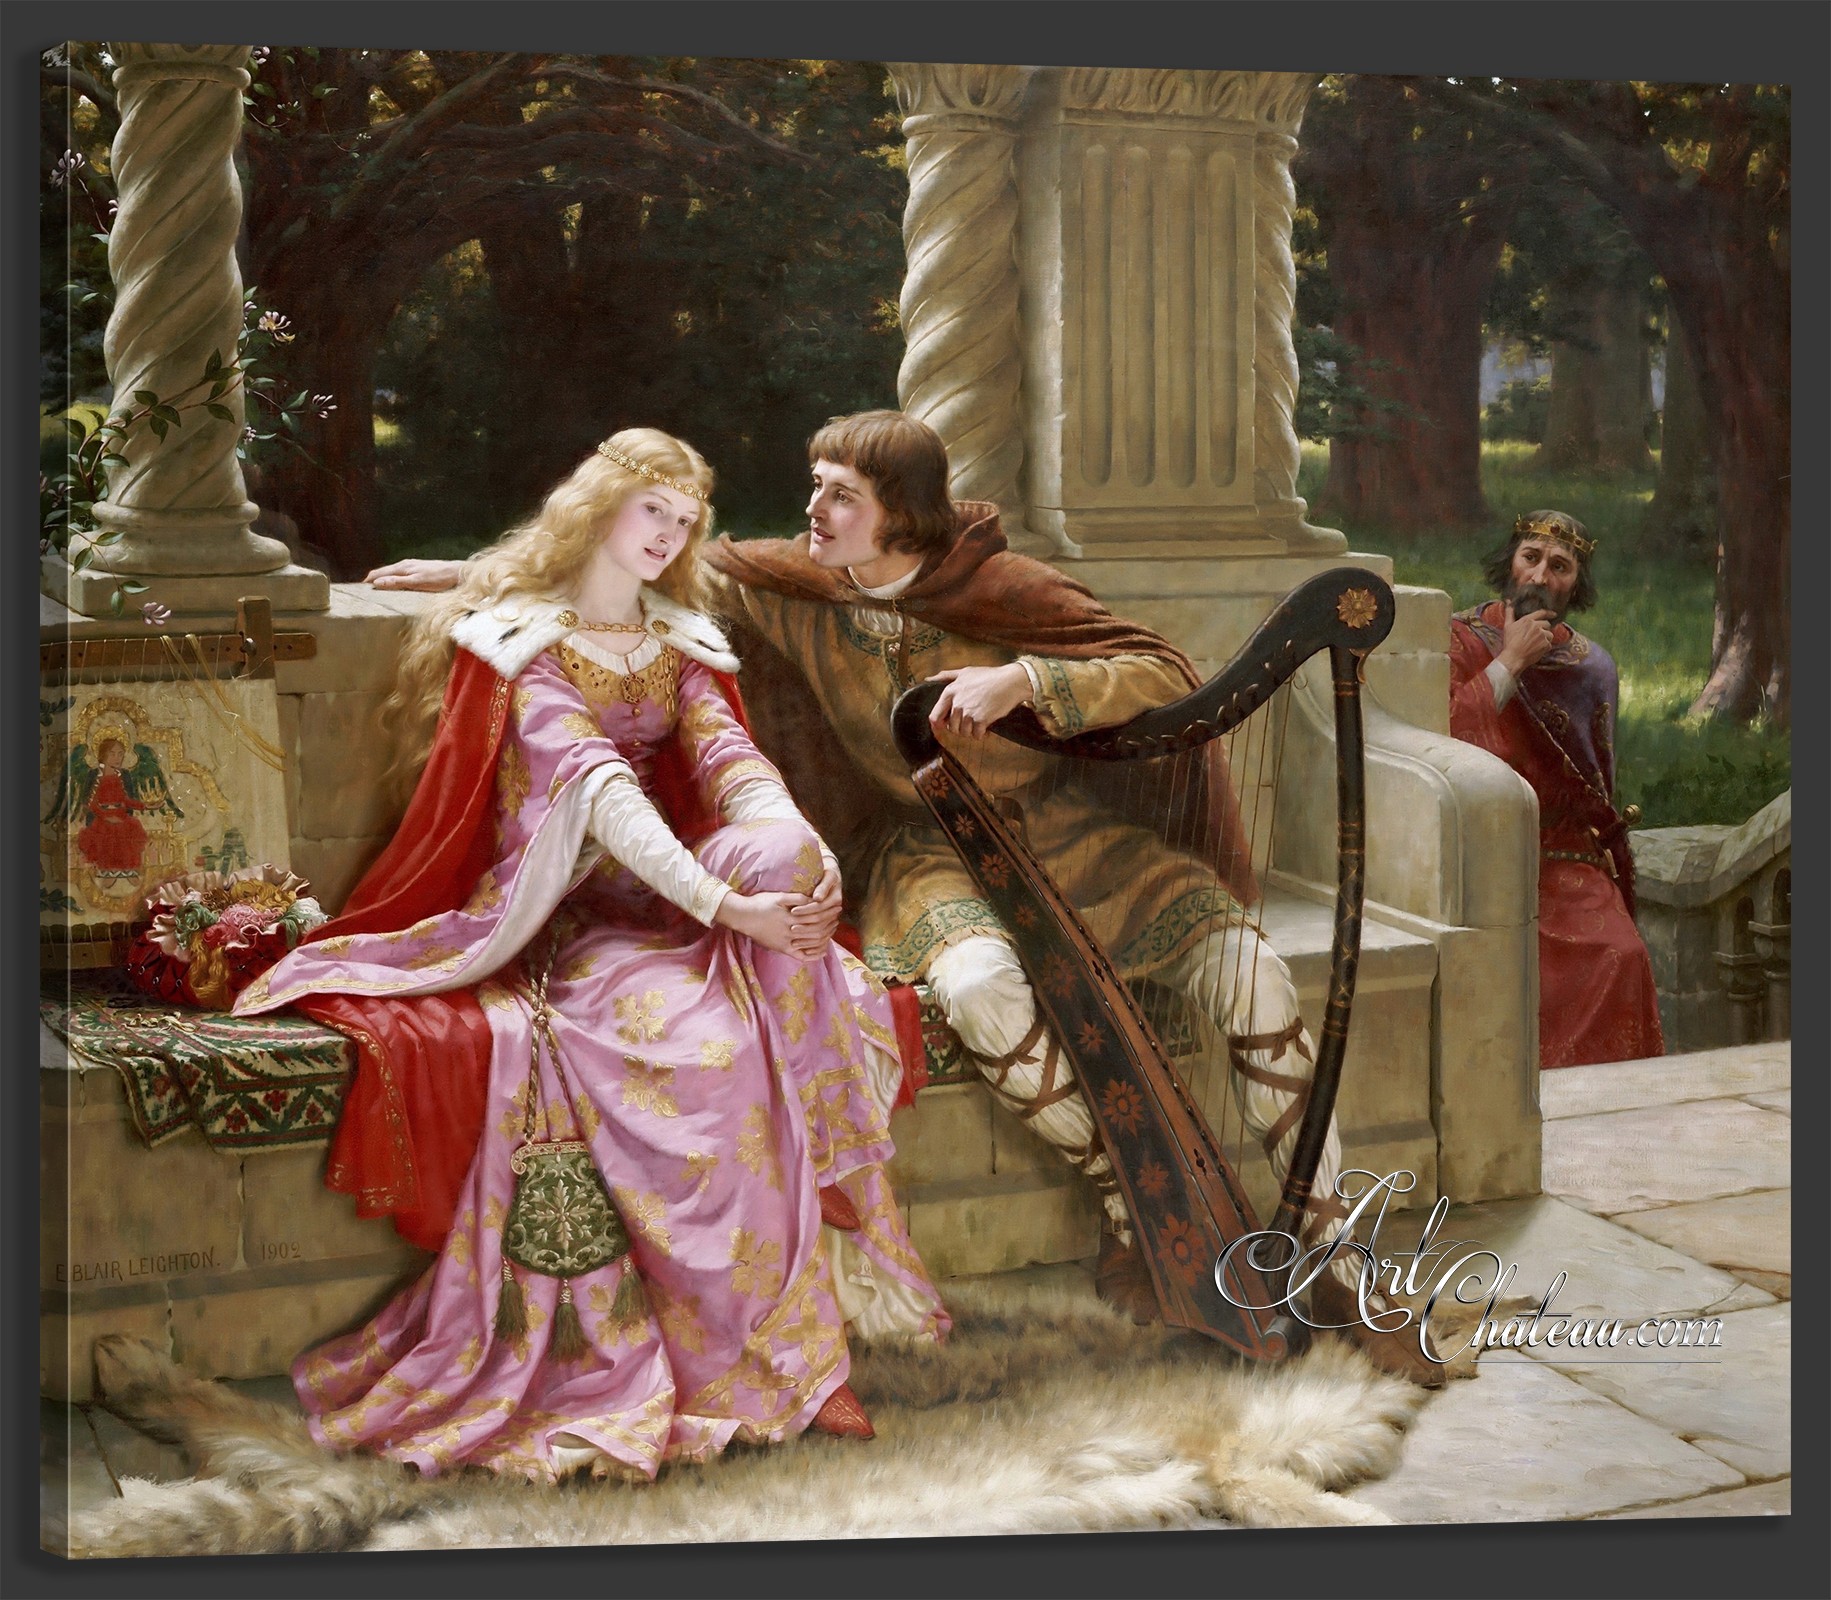 Tristan and Isolde Painting, after Edmund Blair Leighton